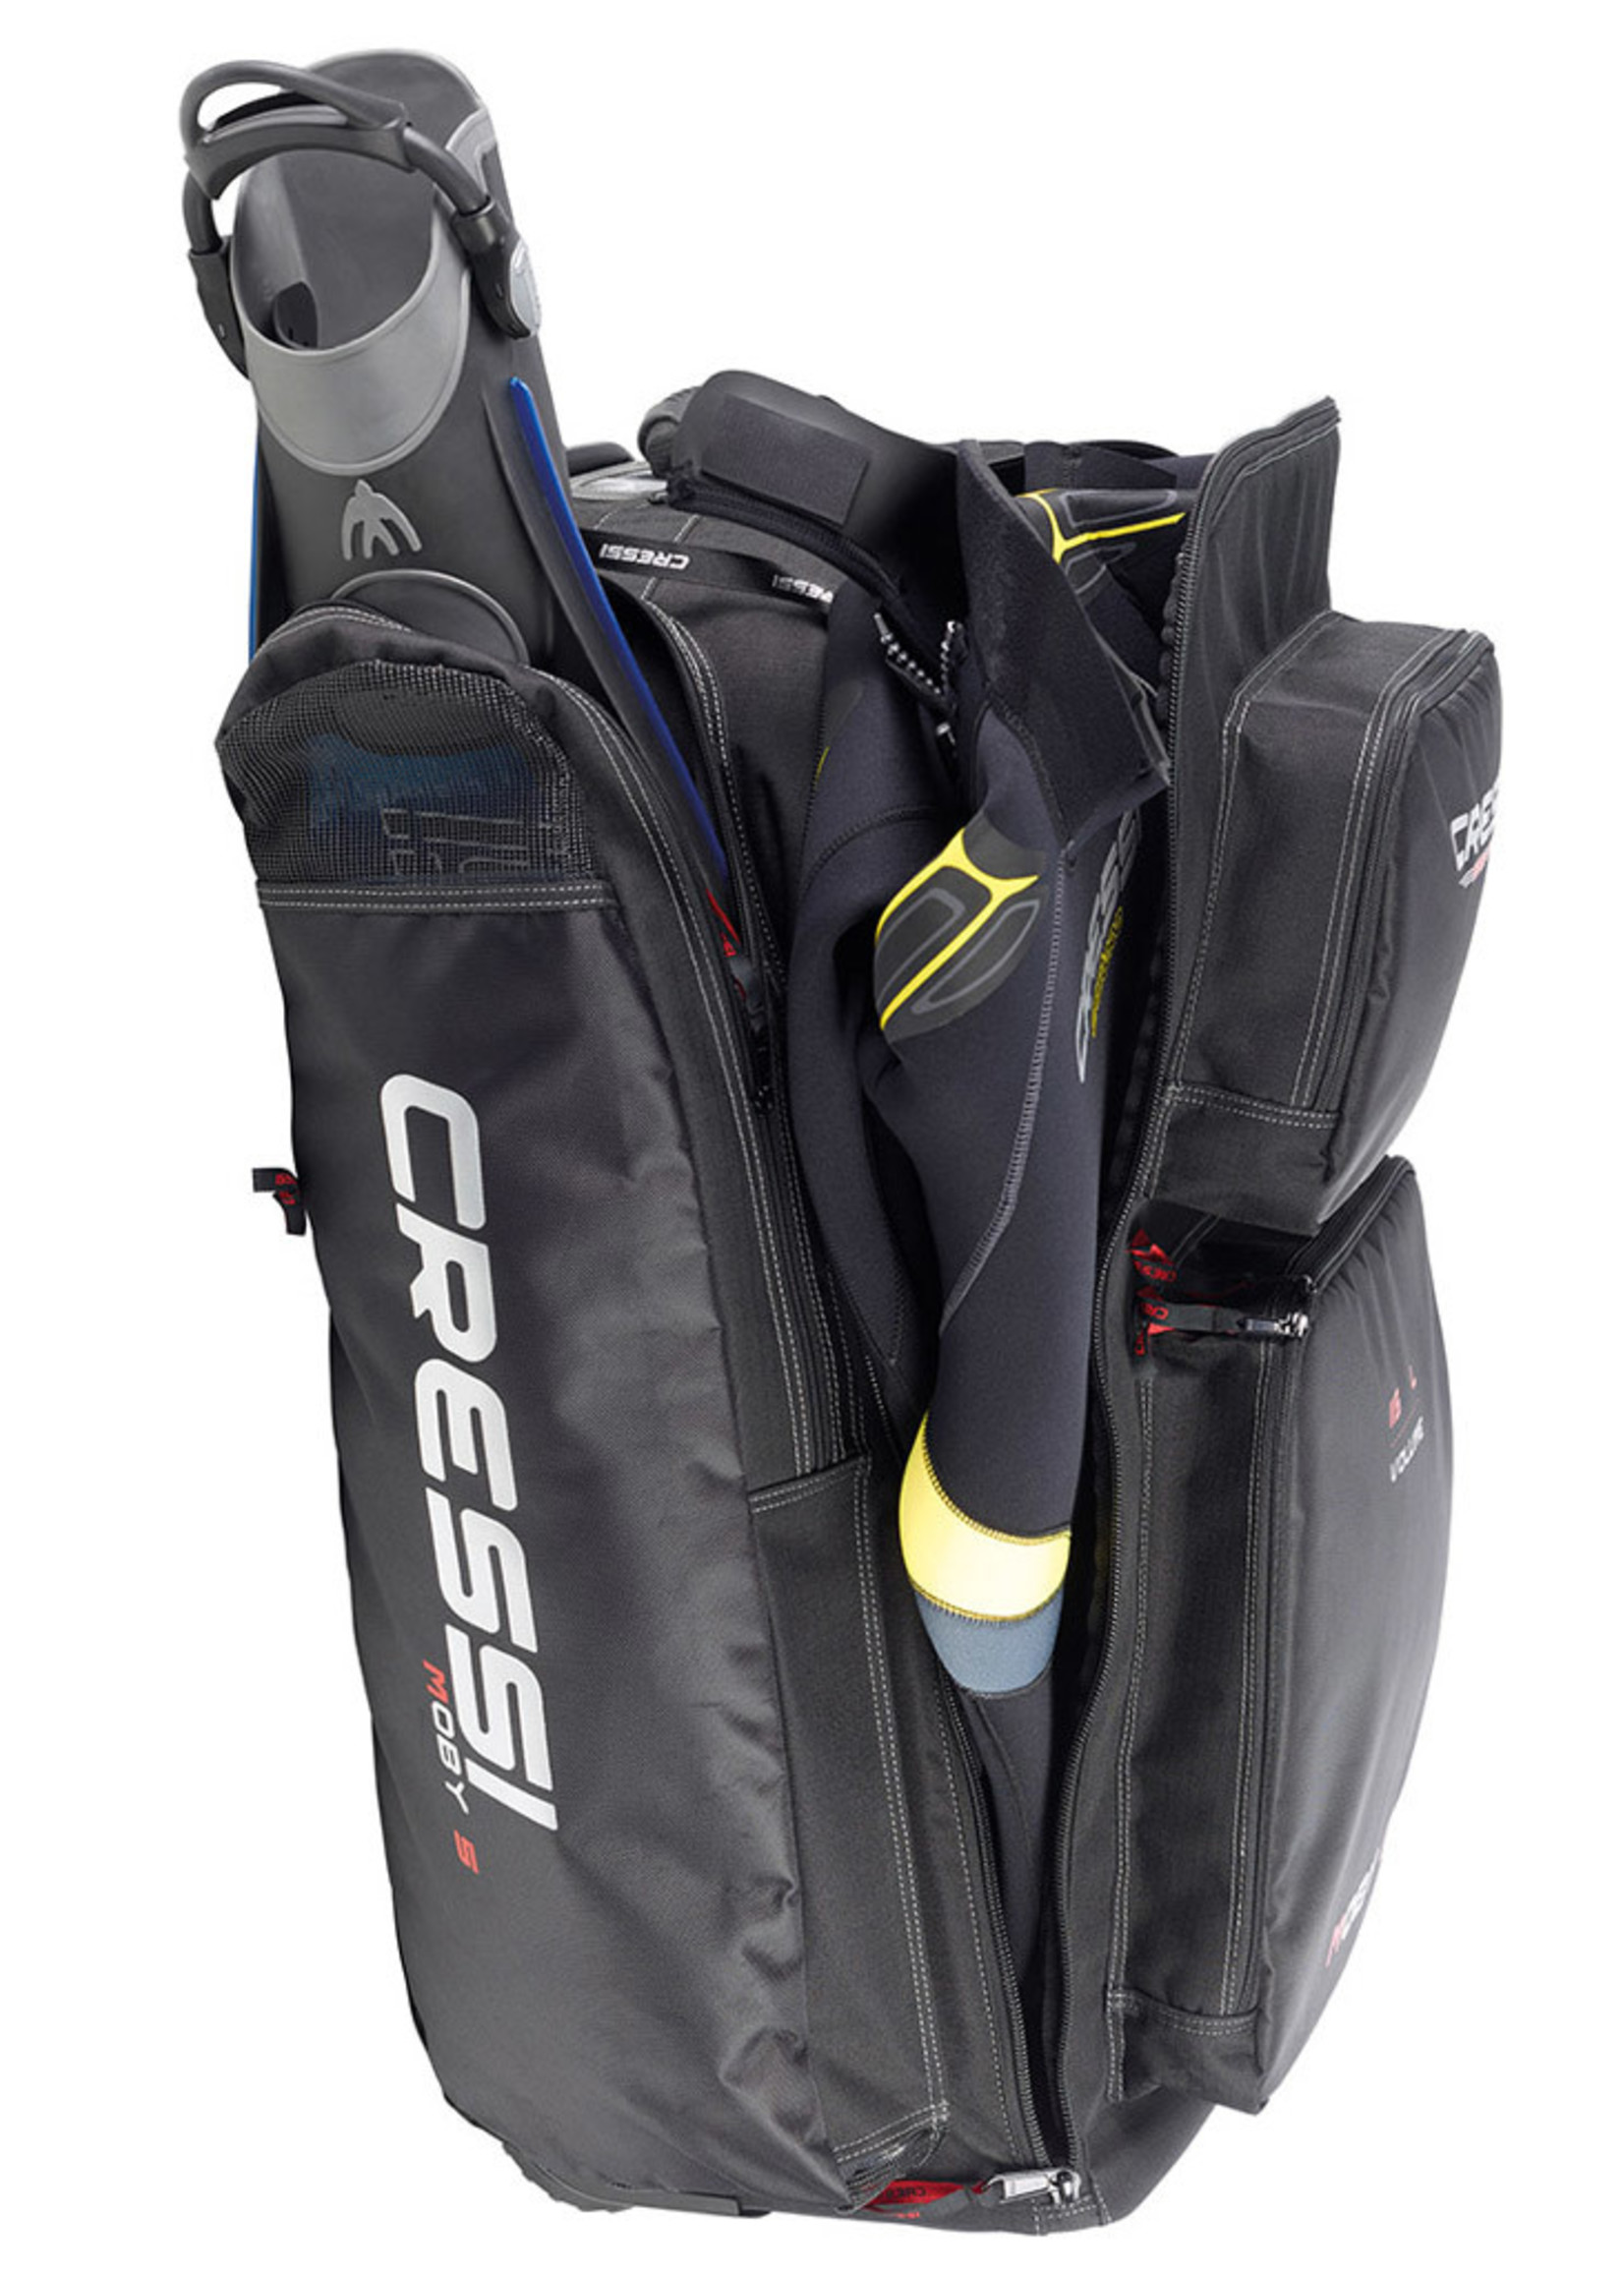 CRESSI CRESSI Moby 5 Bag (black with red details)